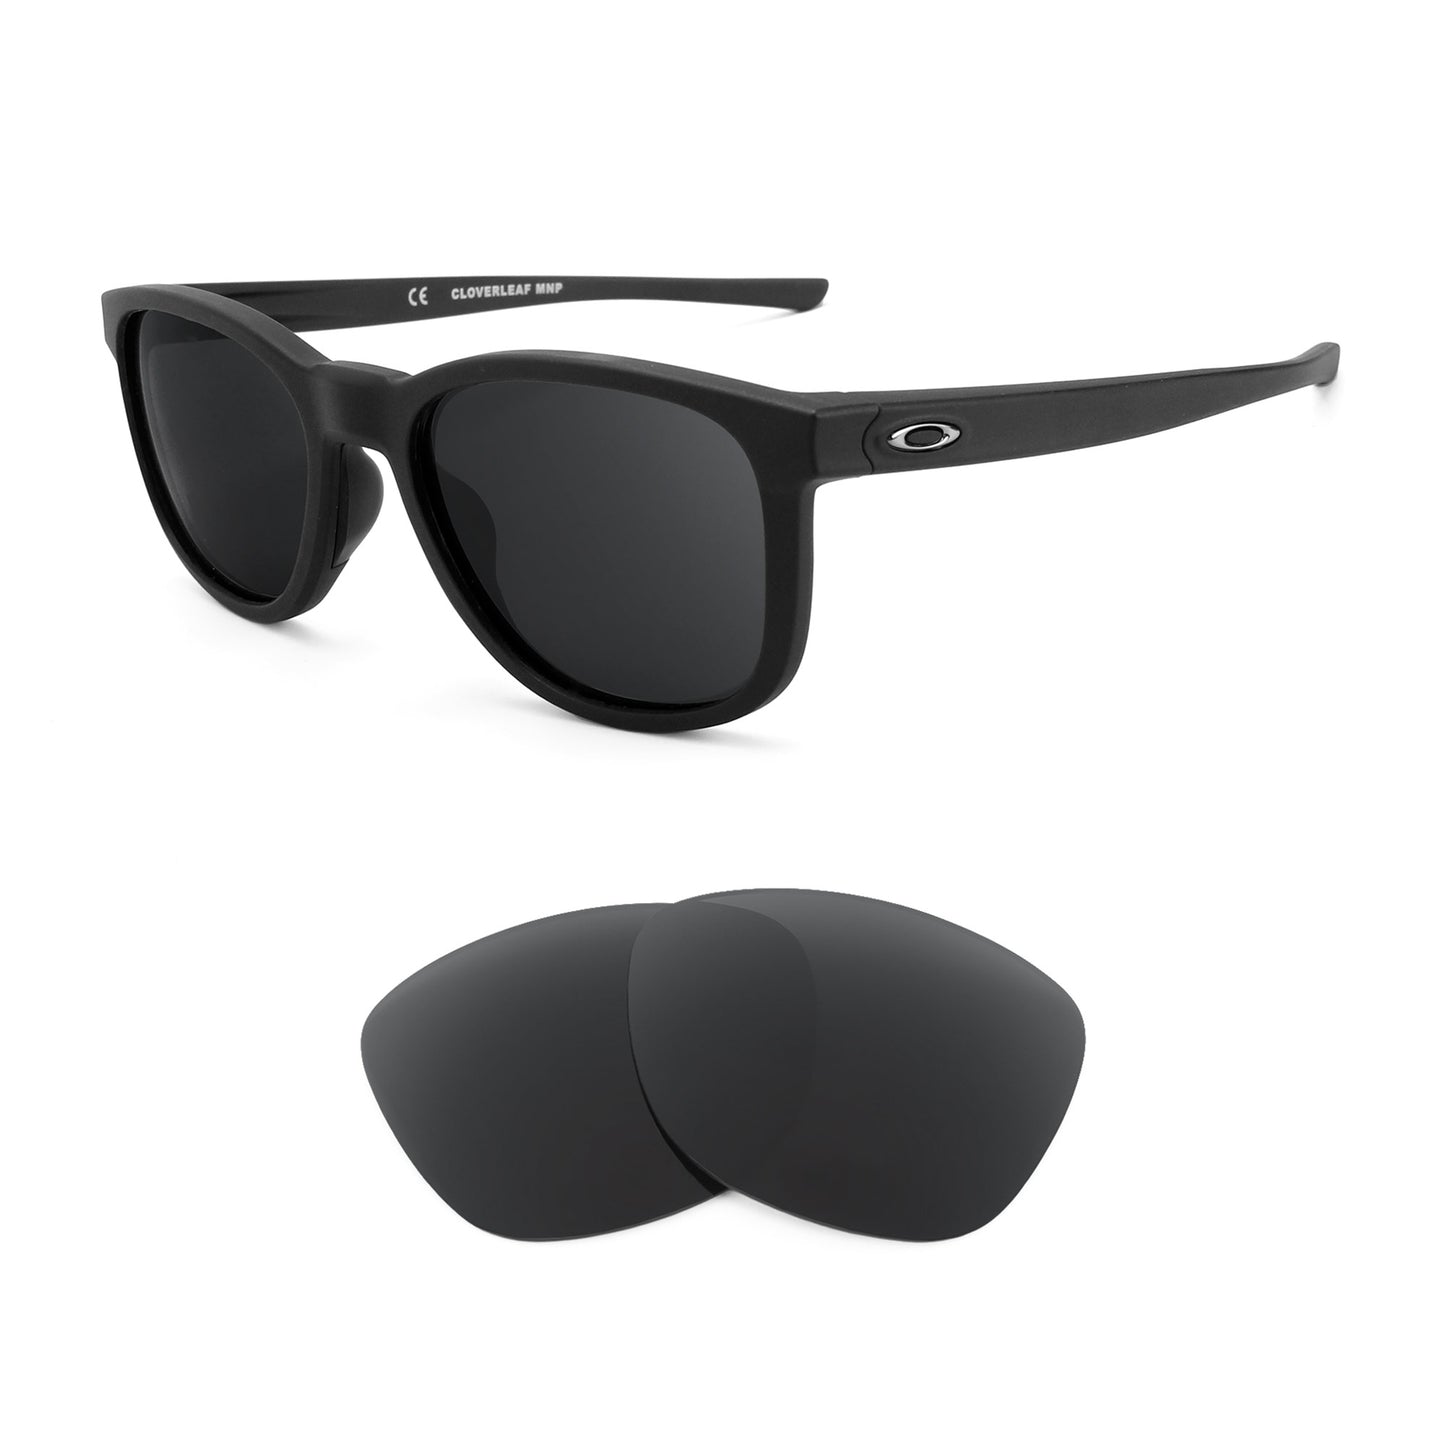 Oakley Cloverleaf 52 sunglasses with replacement lenses